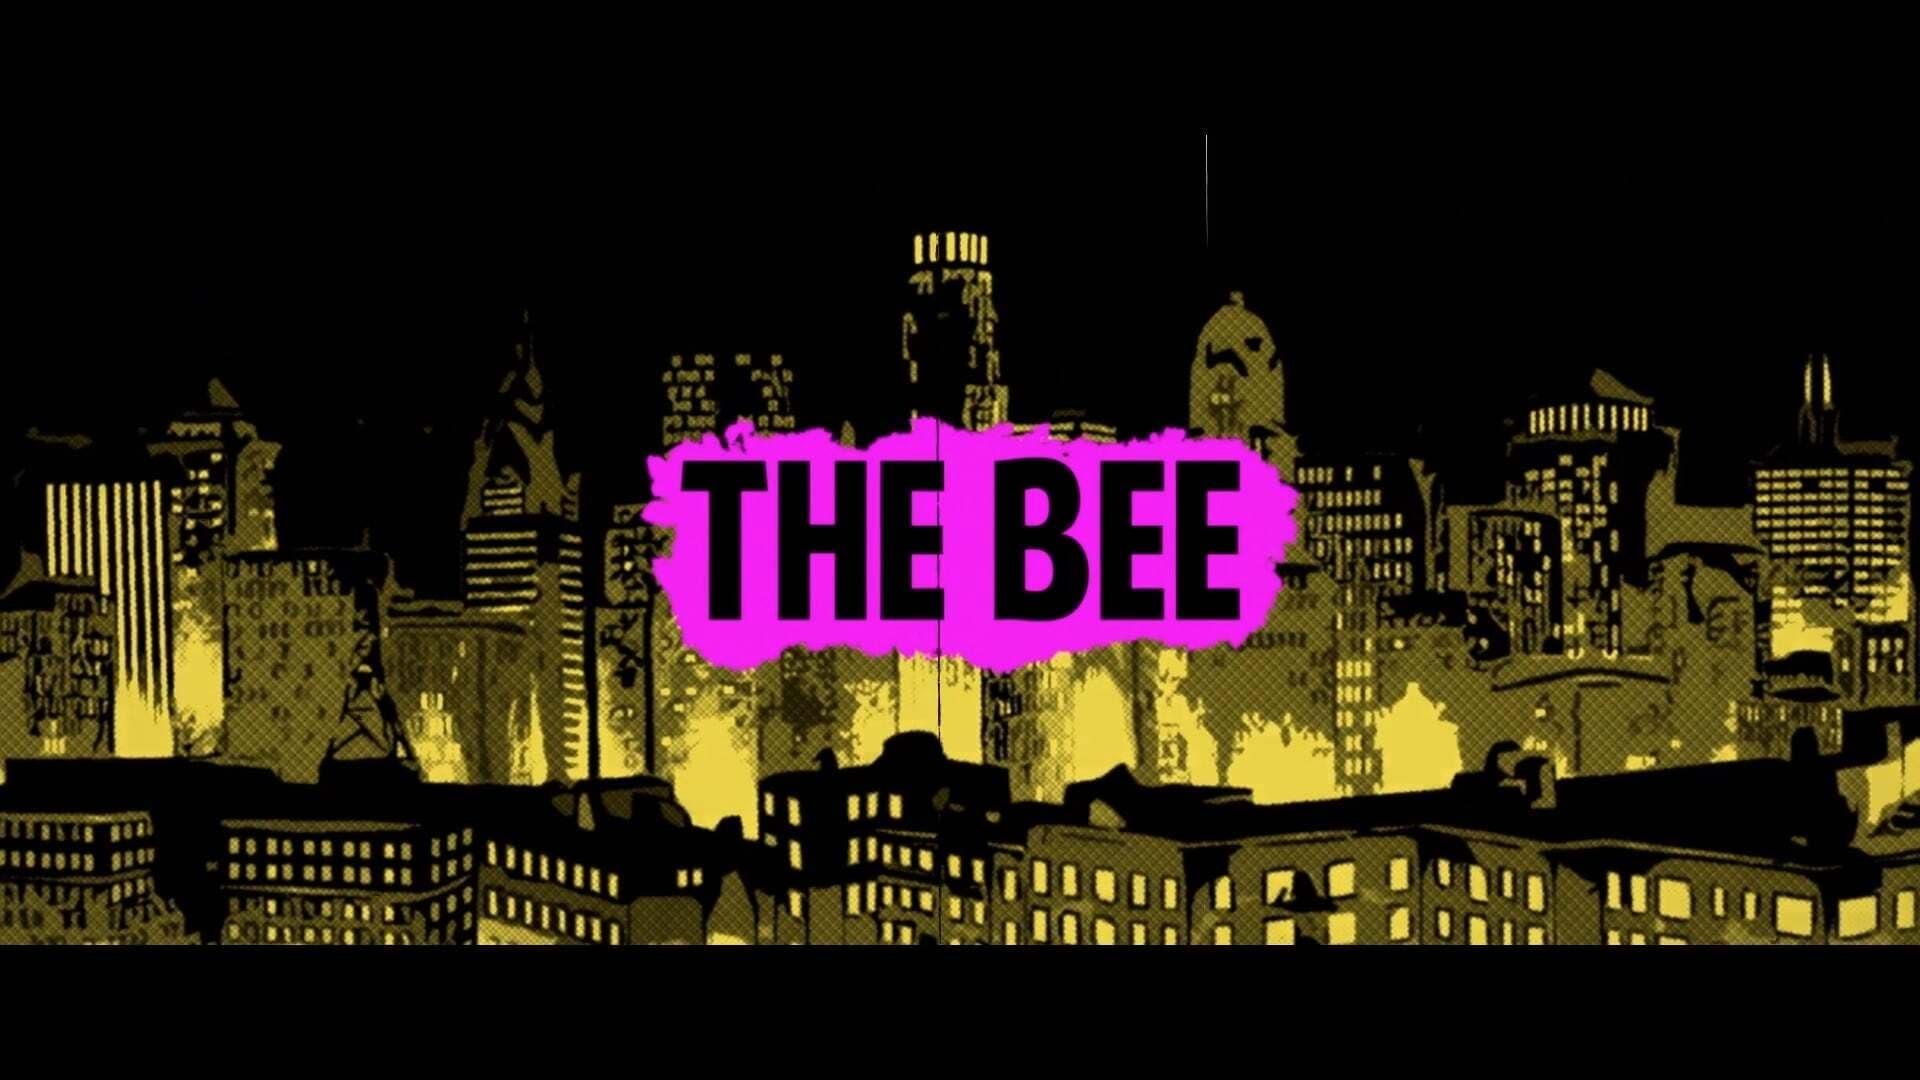 The Bee backdrop